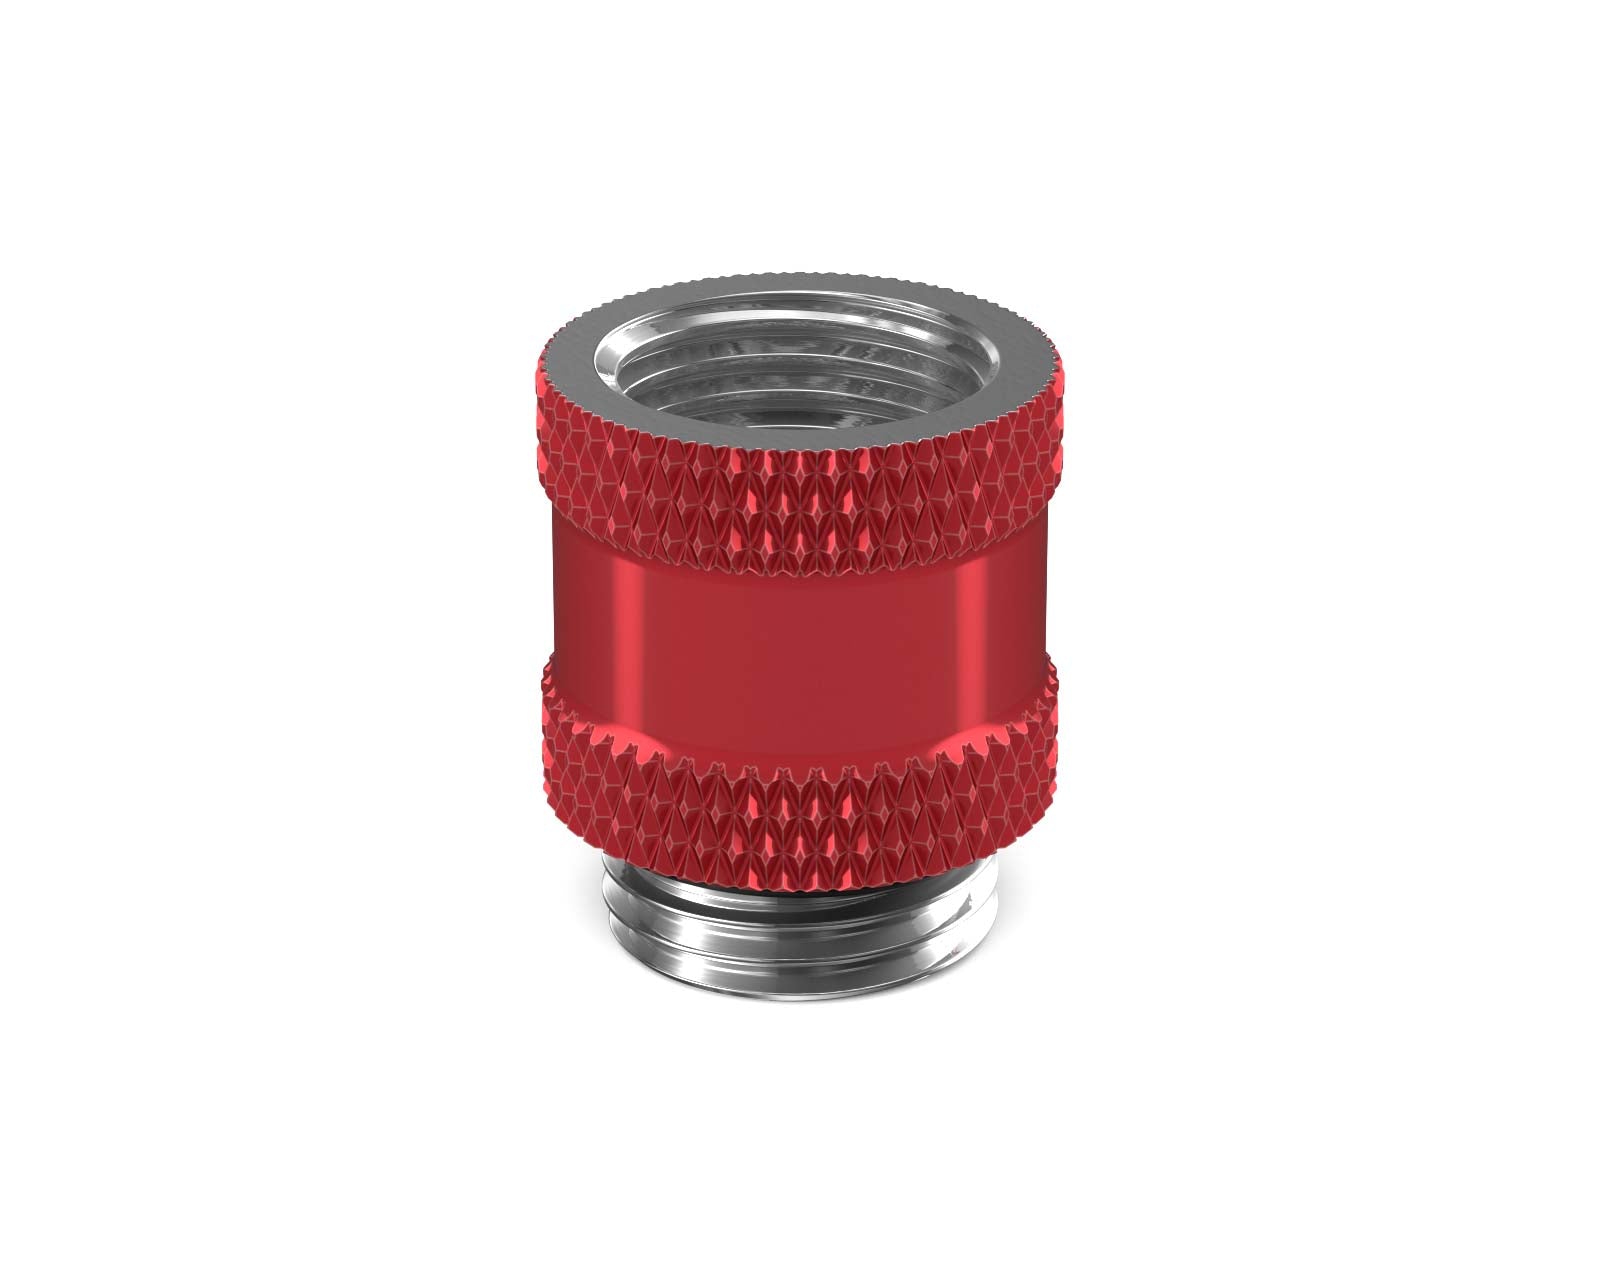 PrimoChill Male to Female G 1/4in. 15mm SX Extension Coupler - Candy Red